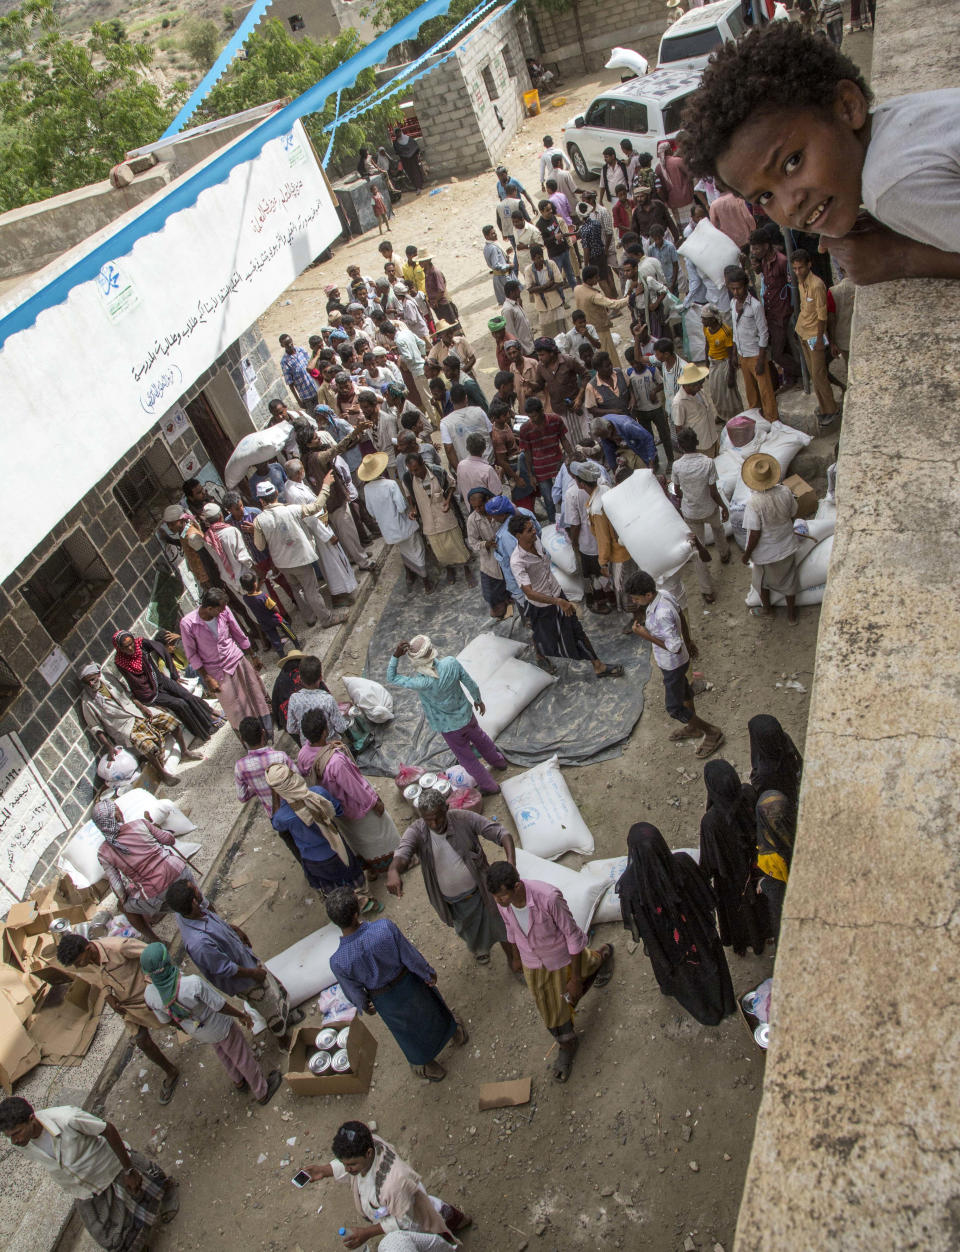 This Nov. 16, 2018 photo shows food distribution by the WFP in Aslem, Yemen. The U.N. food agency said Thursday, Dec. 6, 2018 it is planning to rapidly scale up food distribution to help another 4 million people in Yemen over the next two months, more than a 50-percent increase in the number reached now, if access can be maintained in the poor, war-stricken country". (Marco Frattini/WFP via AP)